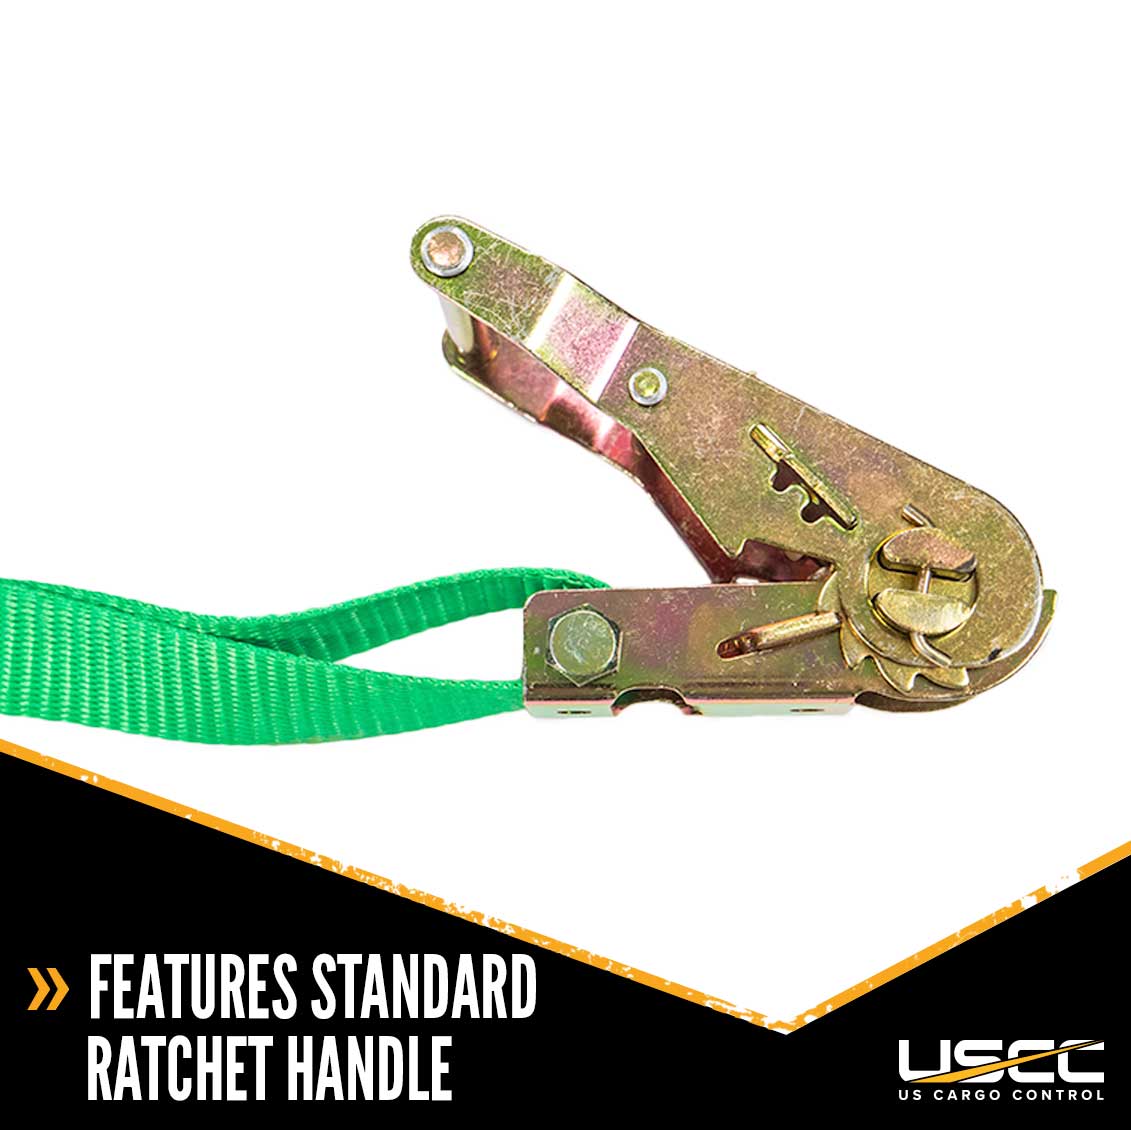 1" x 10' Green Ratchet Strap w/ S-Hook and Keeper